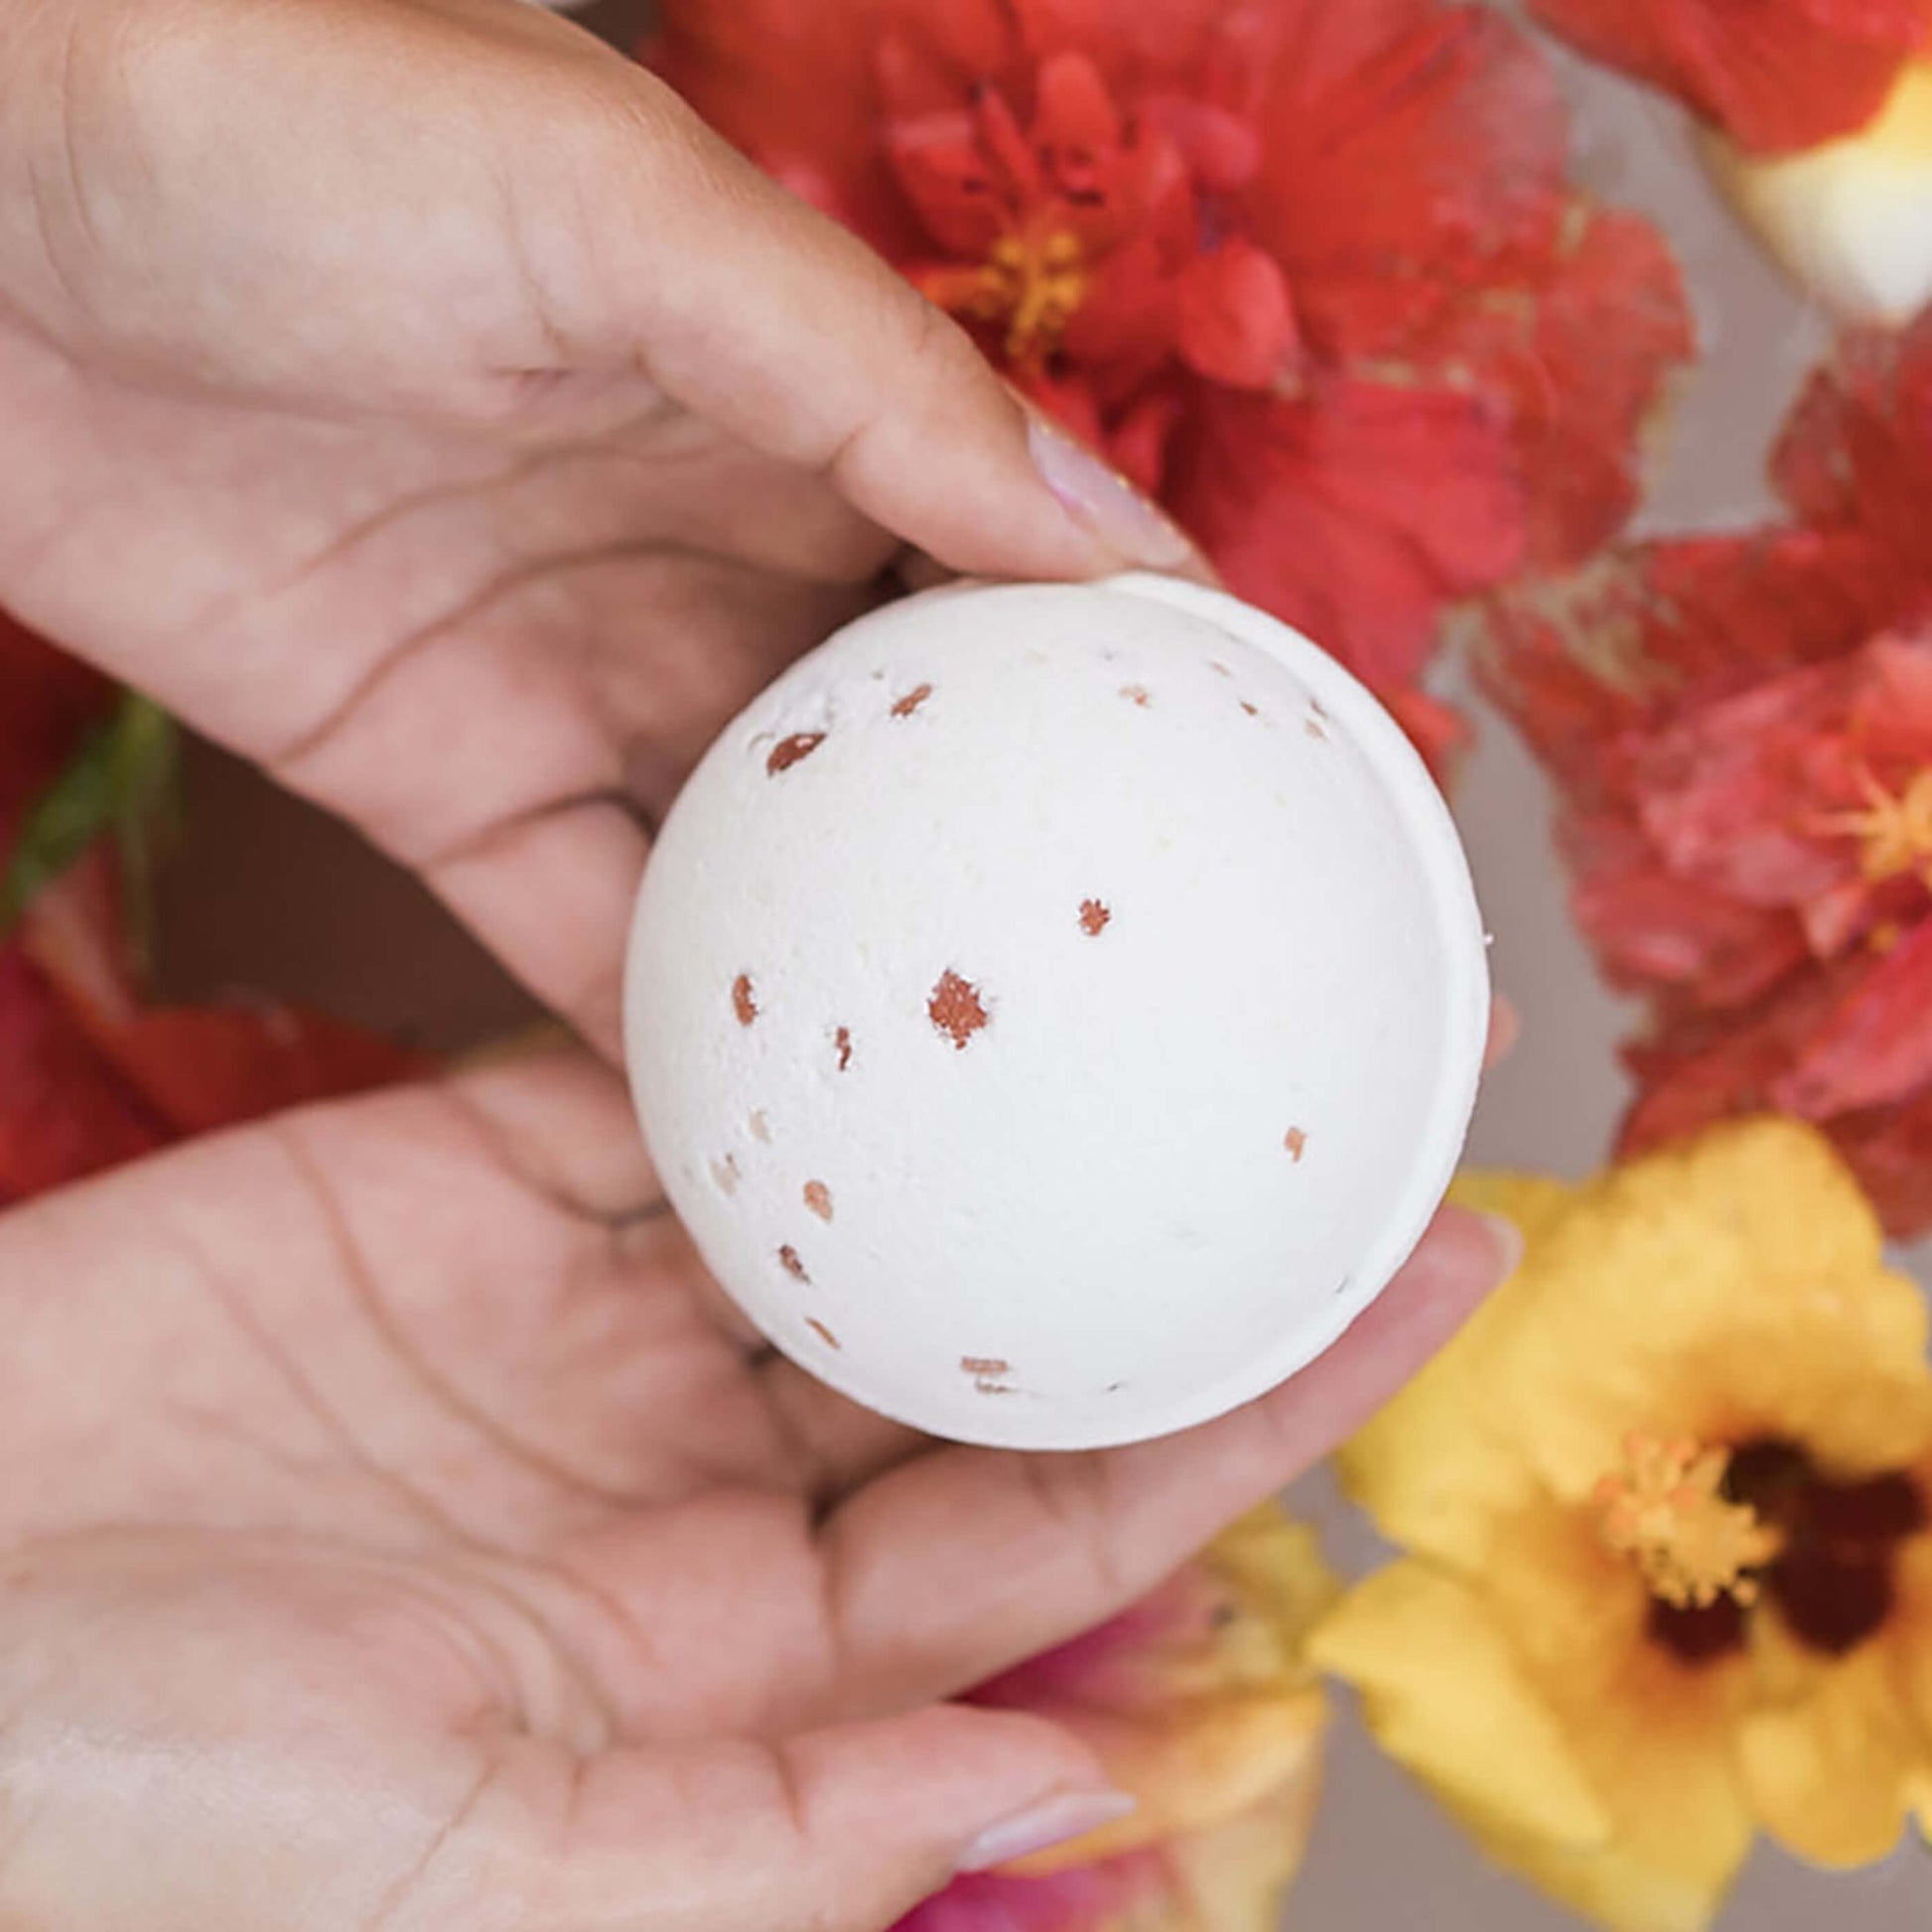 The Zen bath bomb held by two hands over a tub of hibiscus flowers